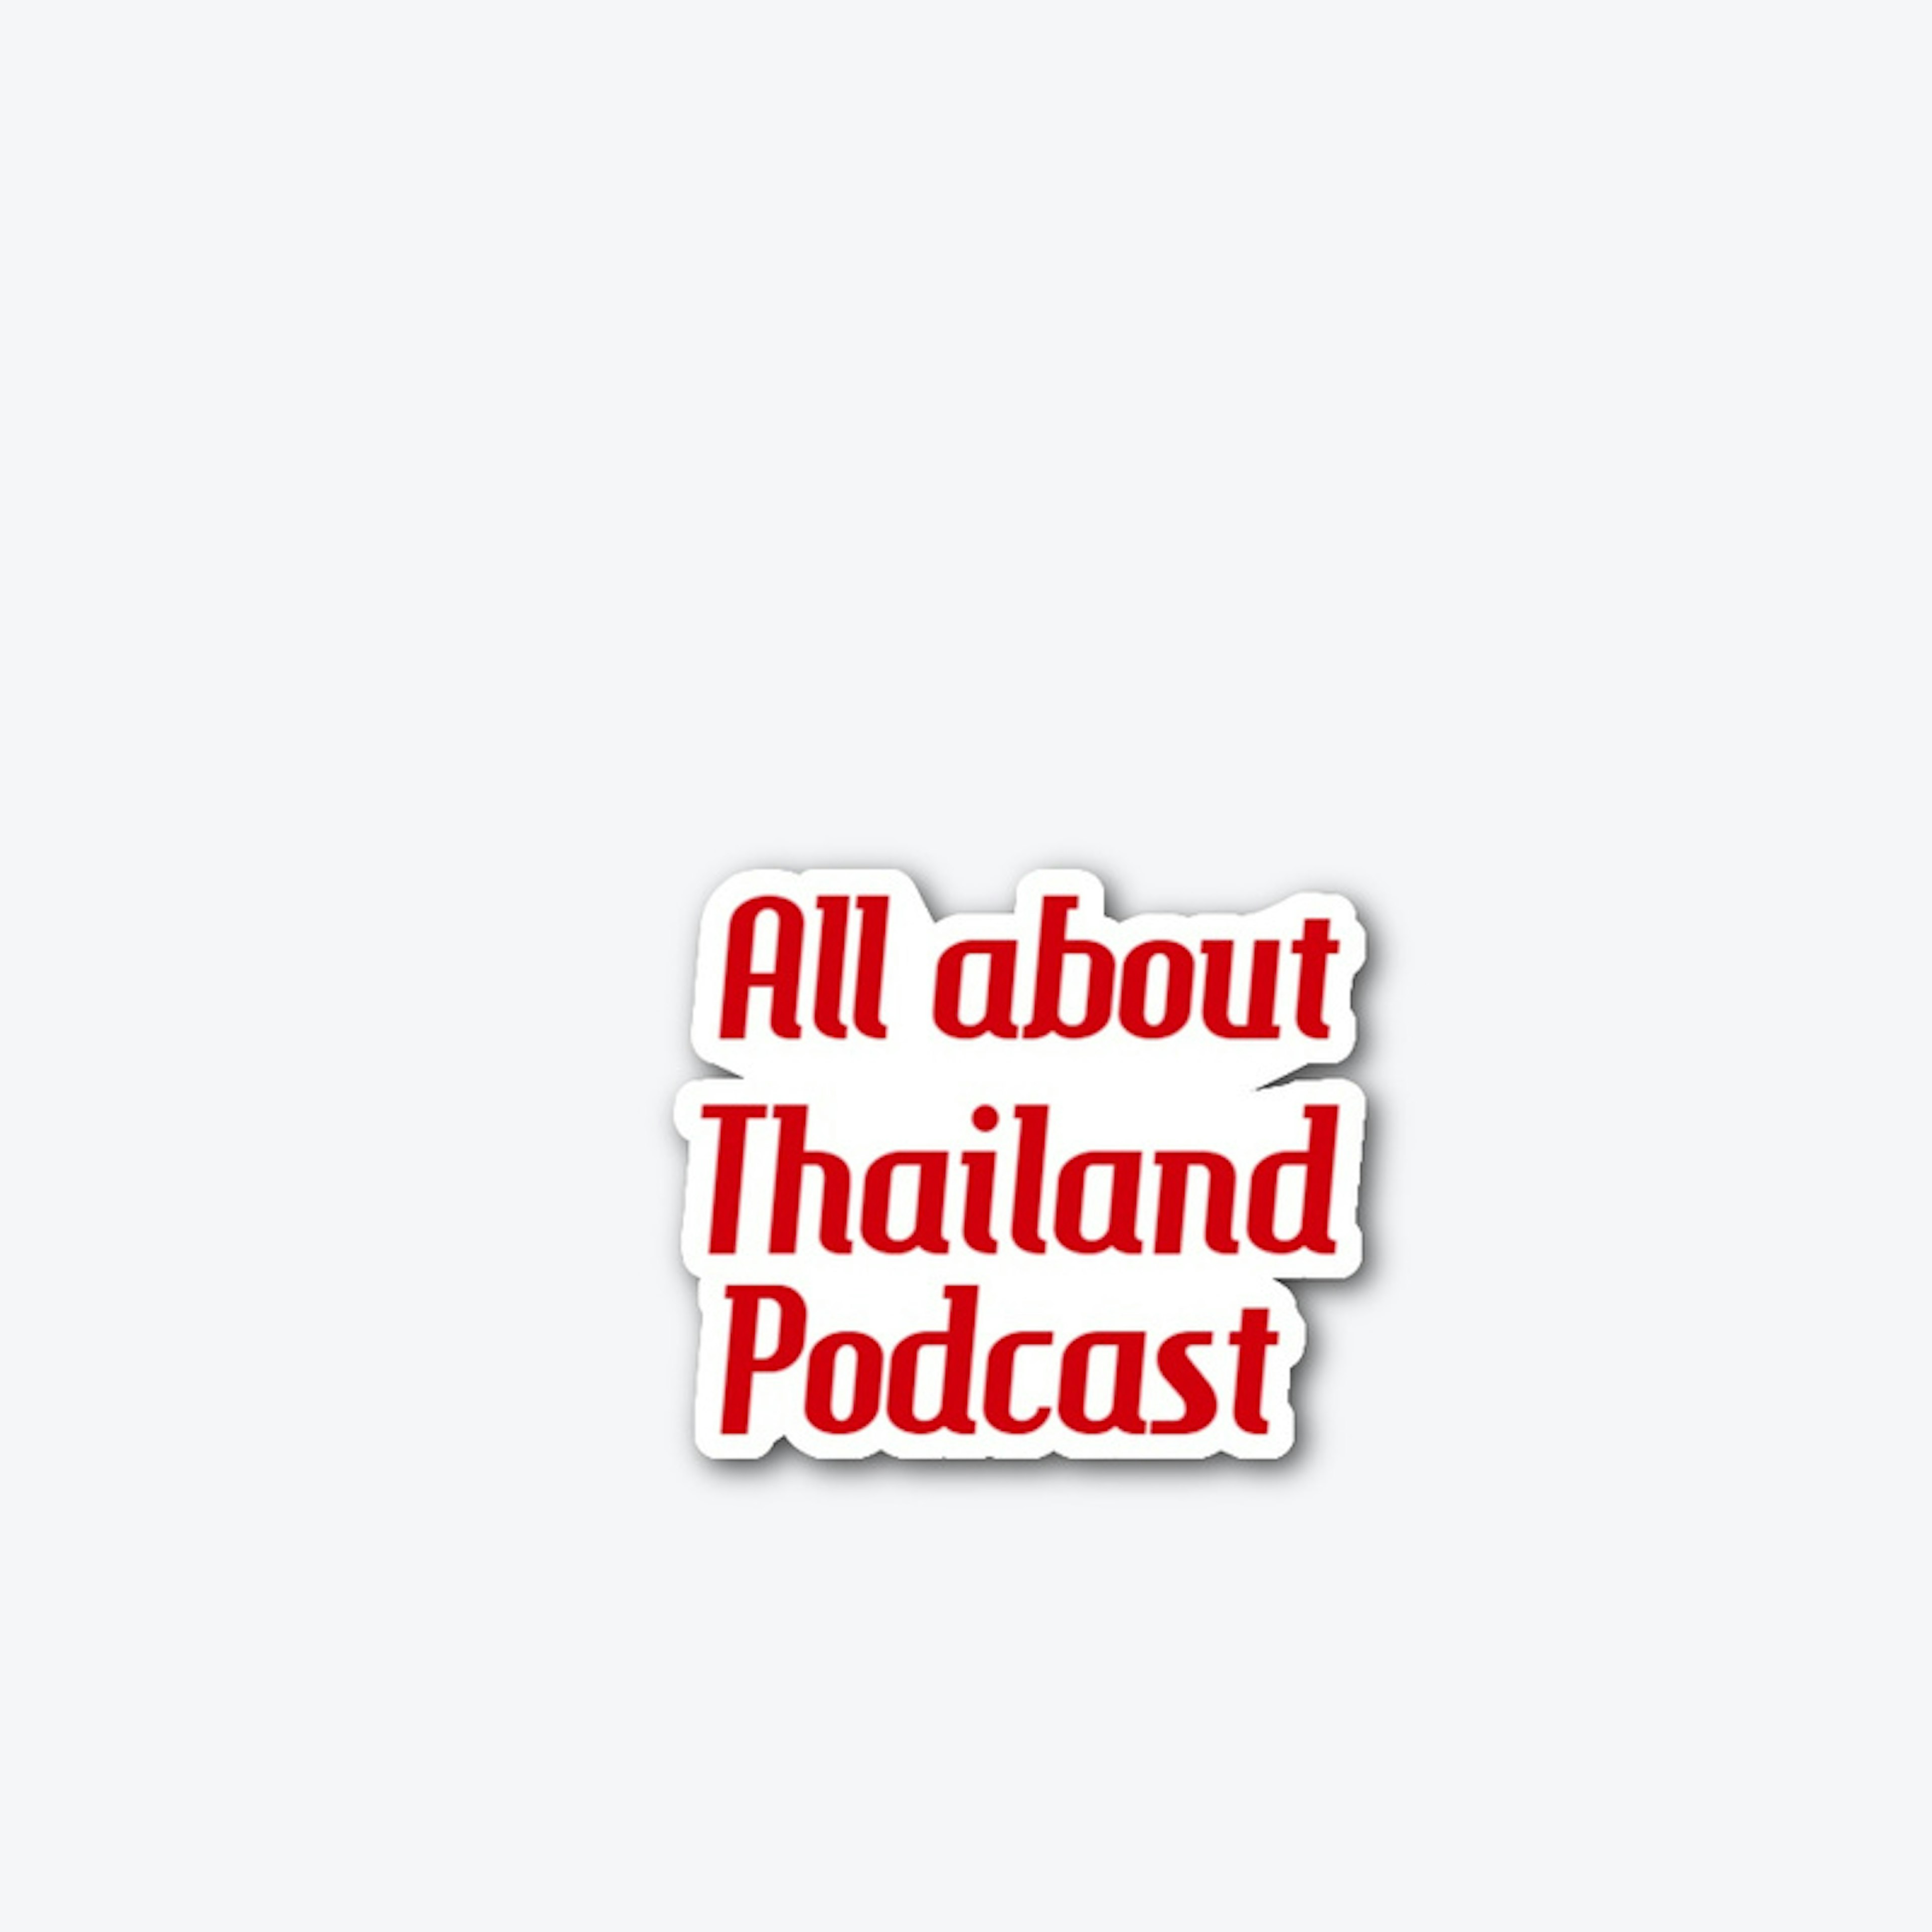 All about Thailand Podcast